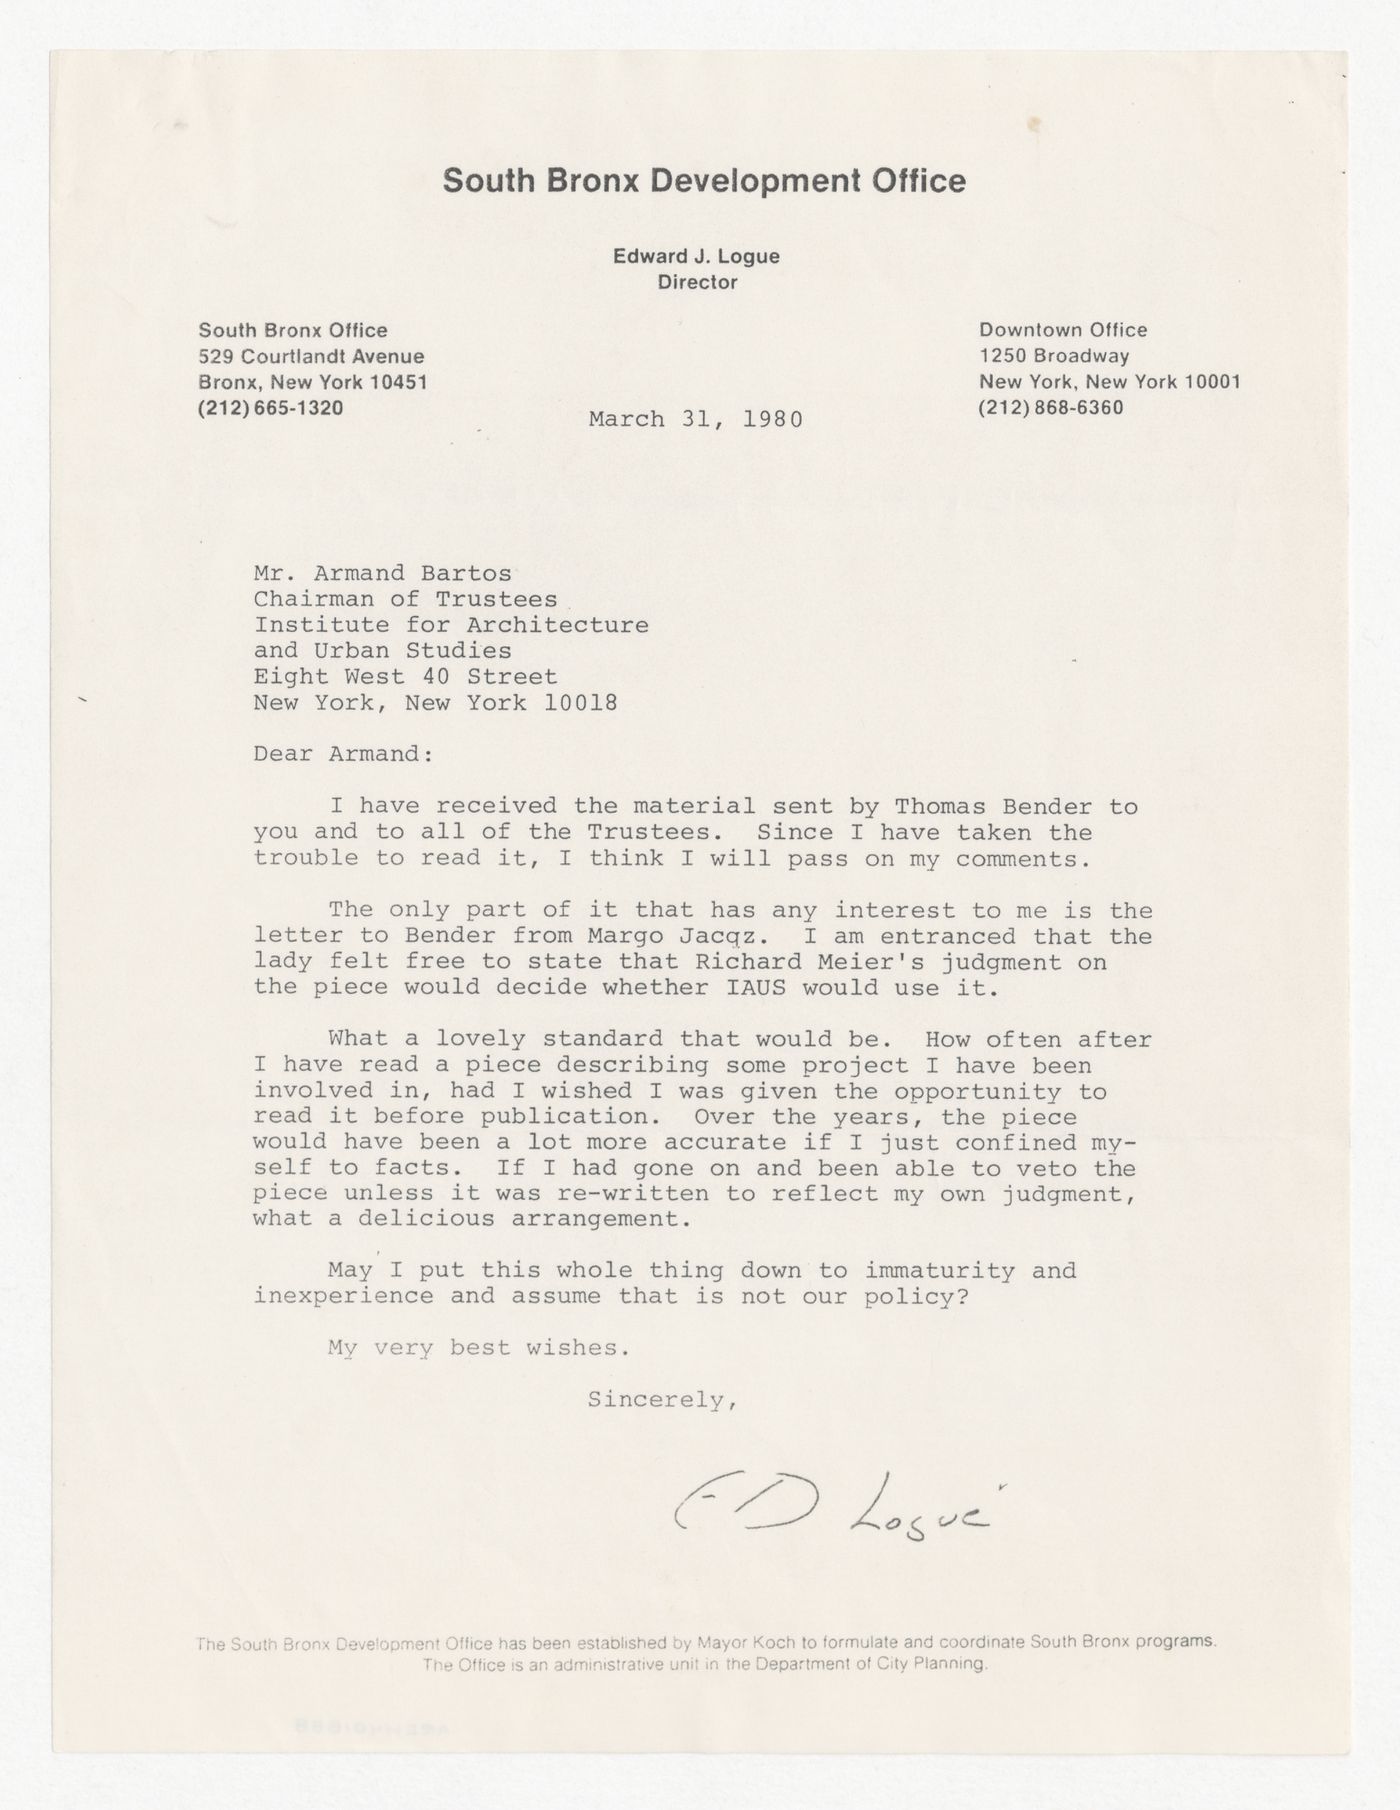 Letter from Edward J. Logue to Armand Bartos about the retraction of an article by Thomas Bender from Skyline